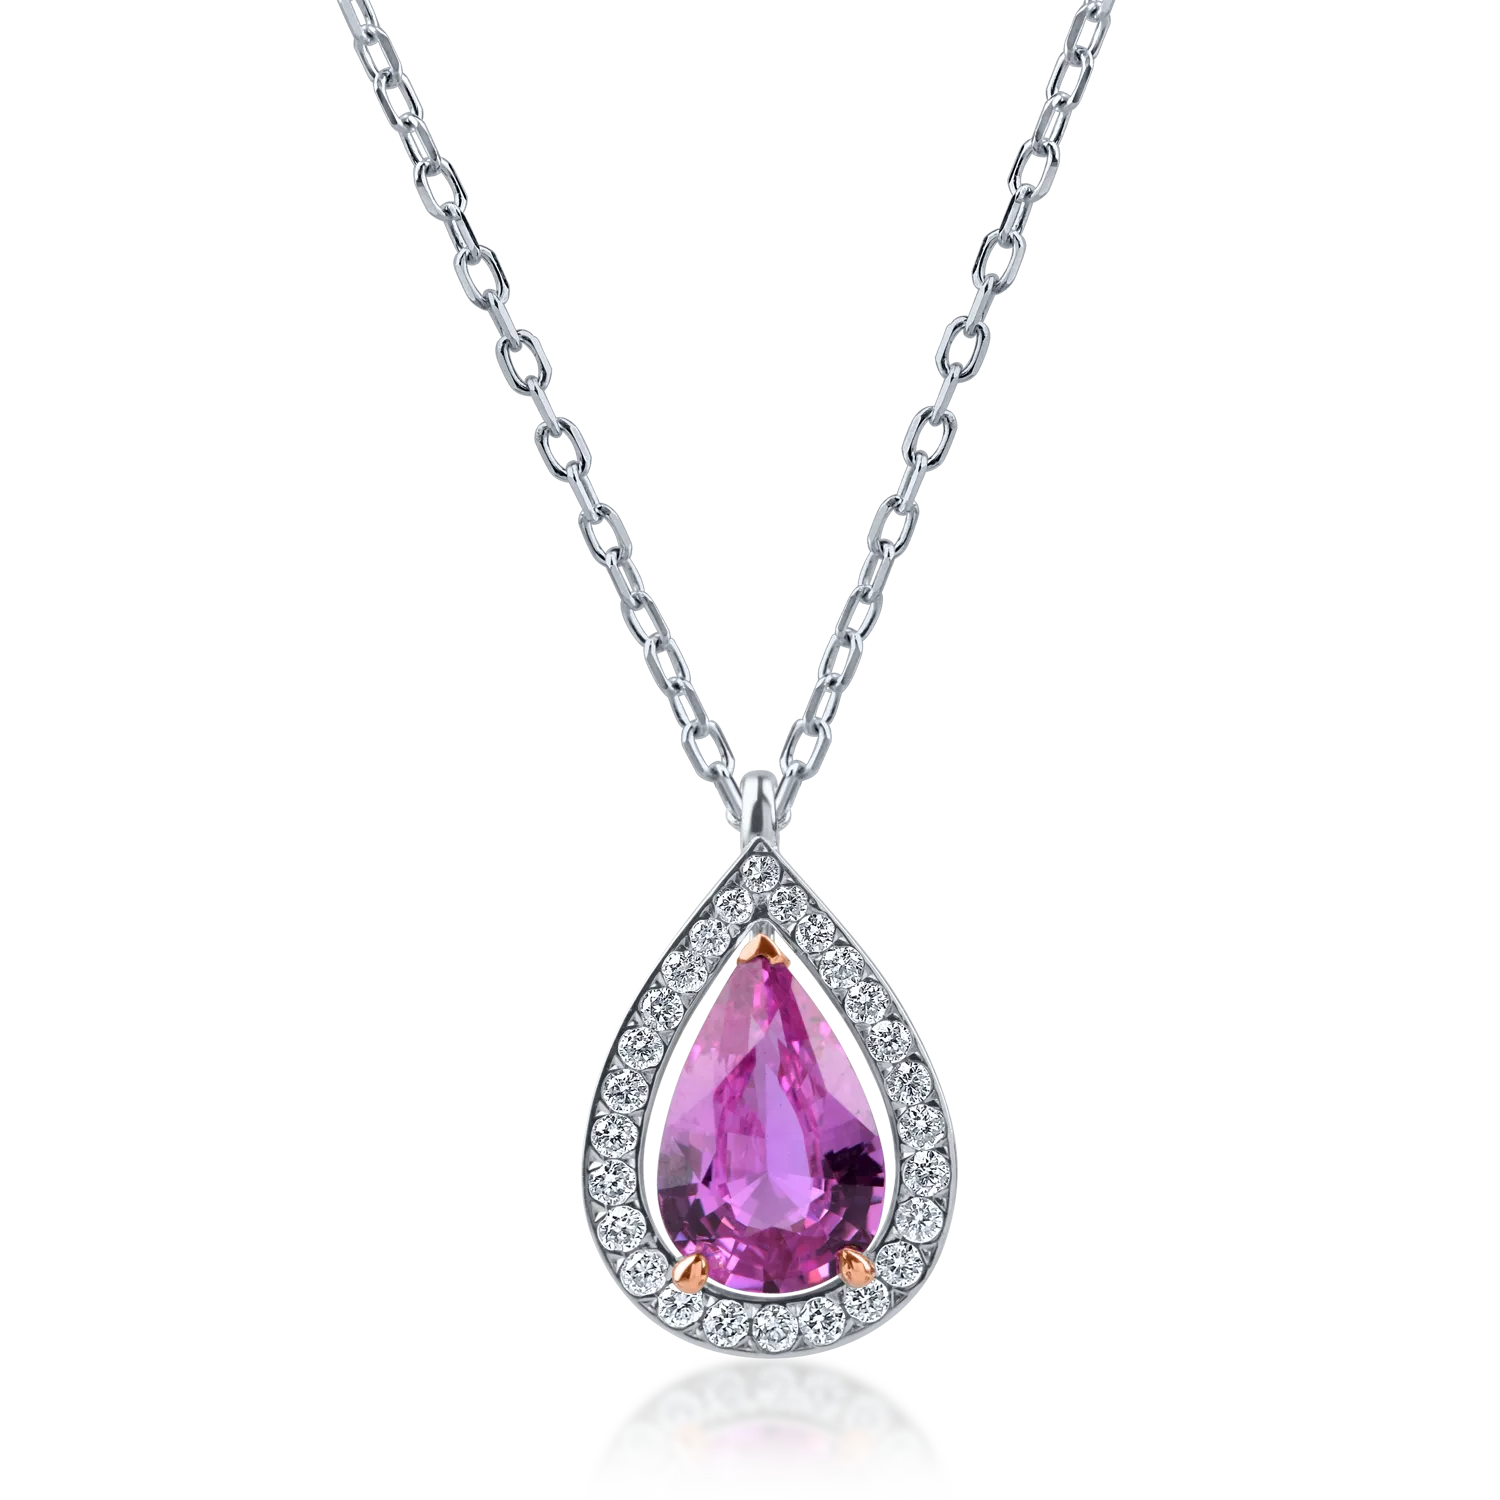 White-rose gold pendant necklace with 1.3ct pink sapphire and 0.1ct diamonds